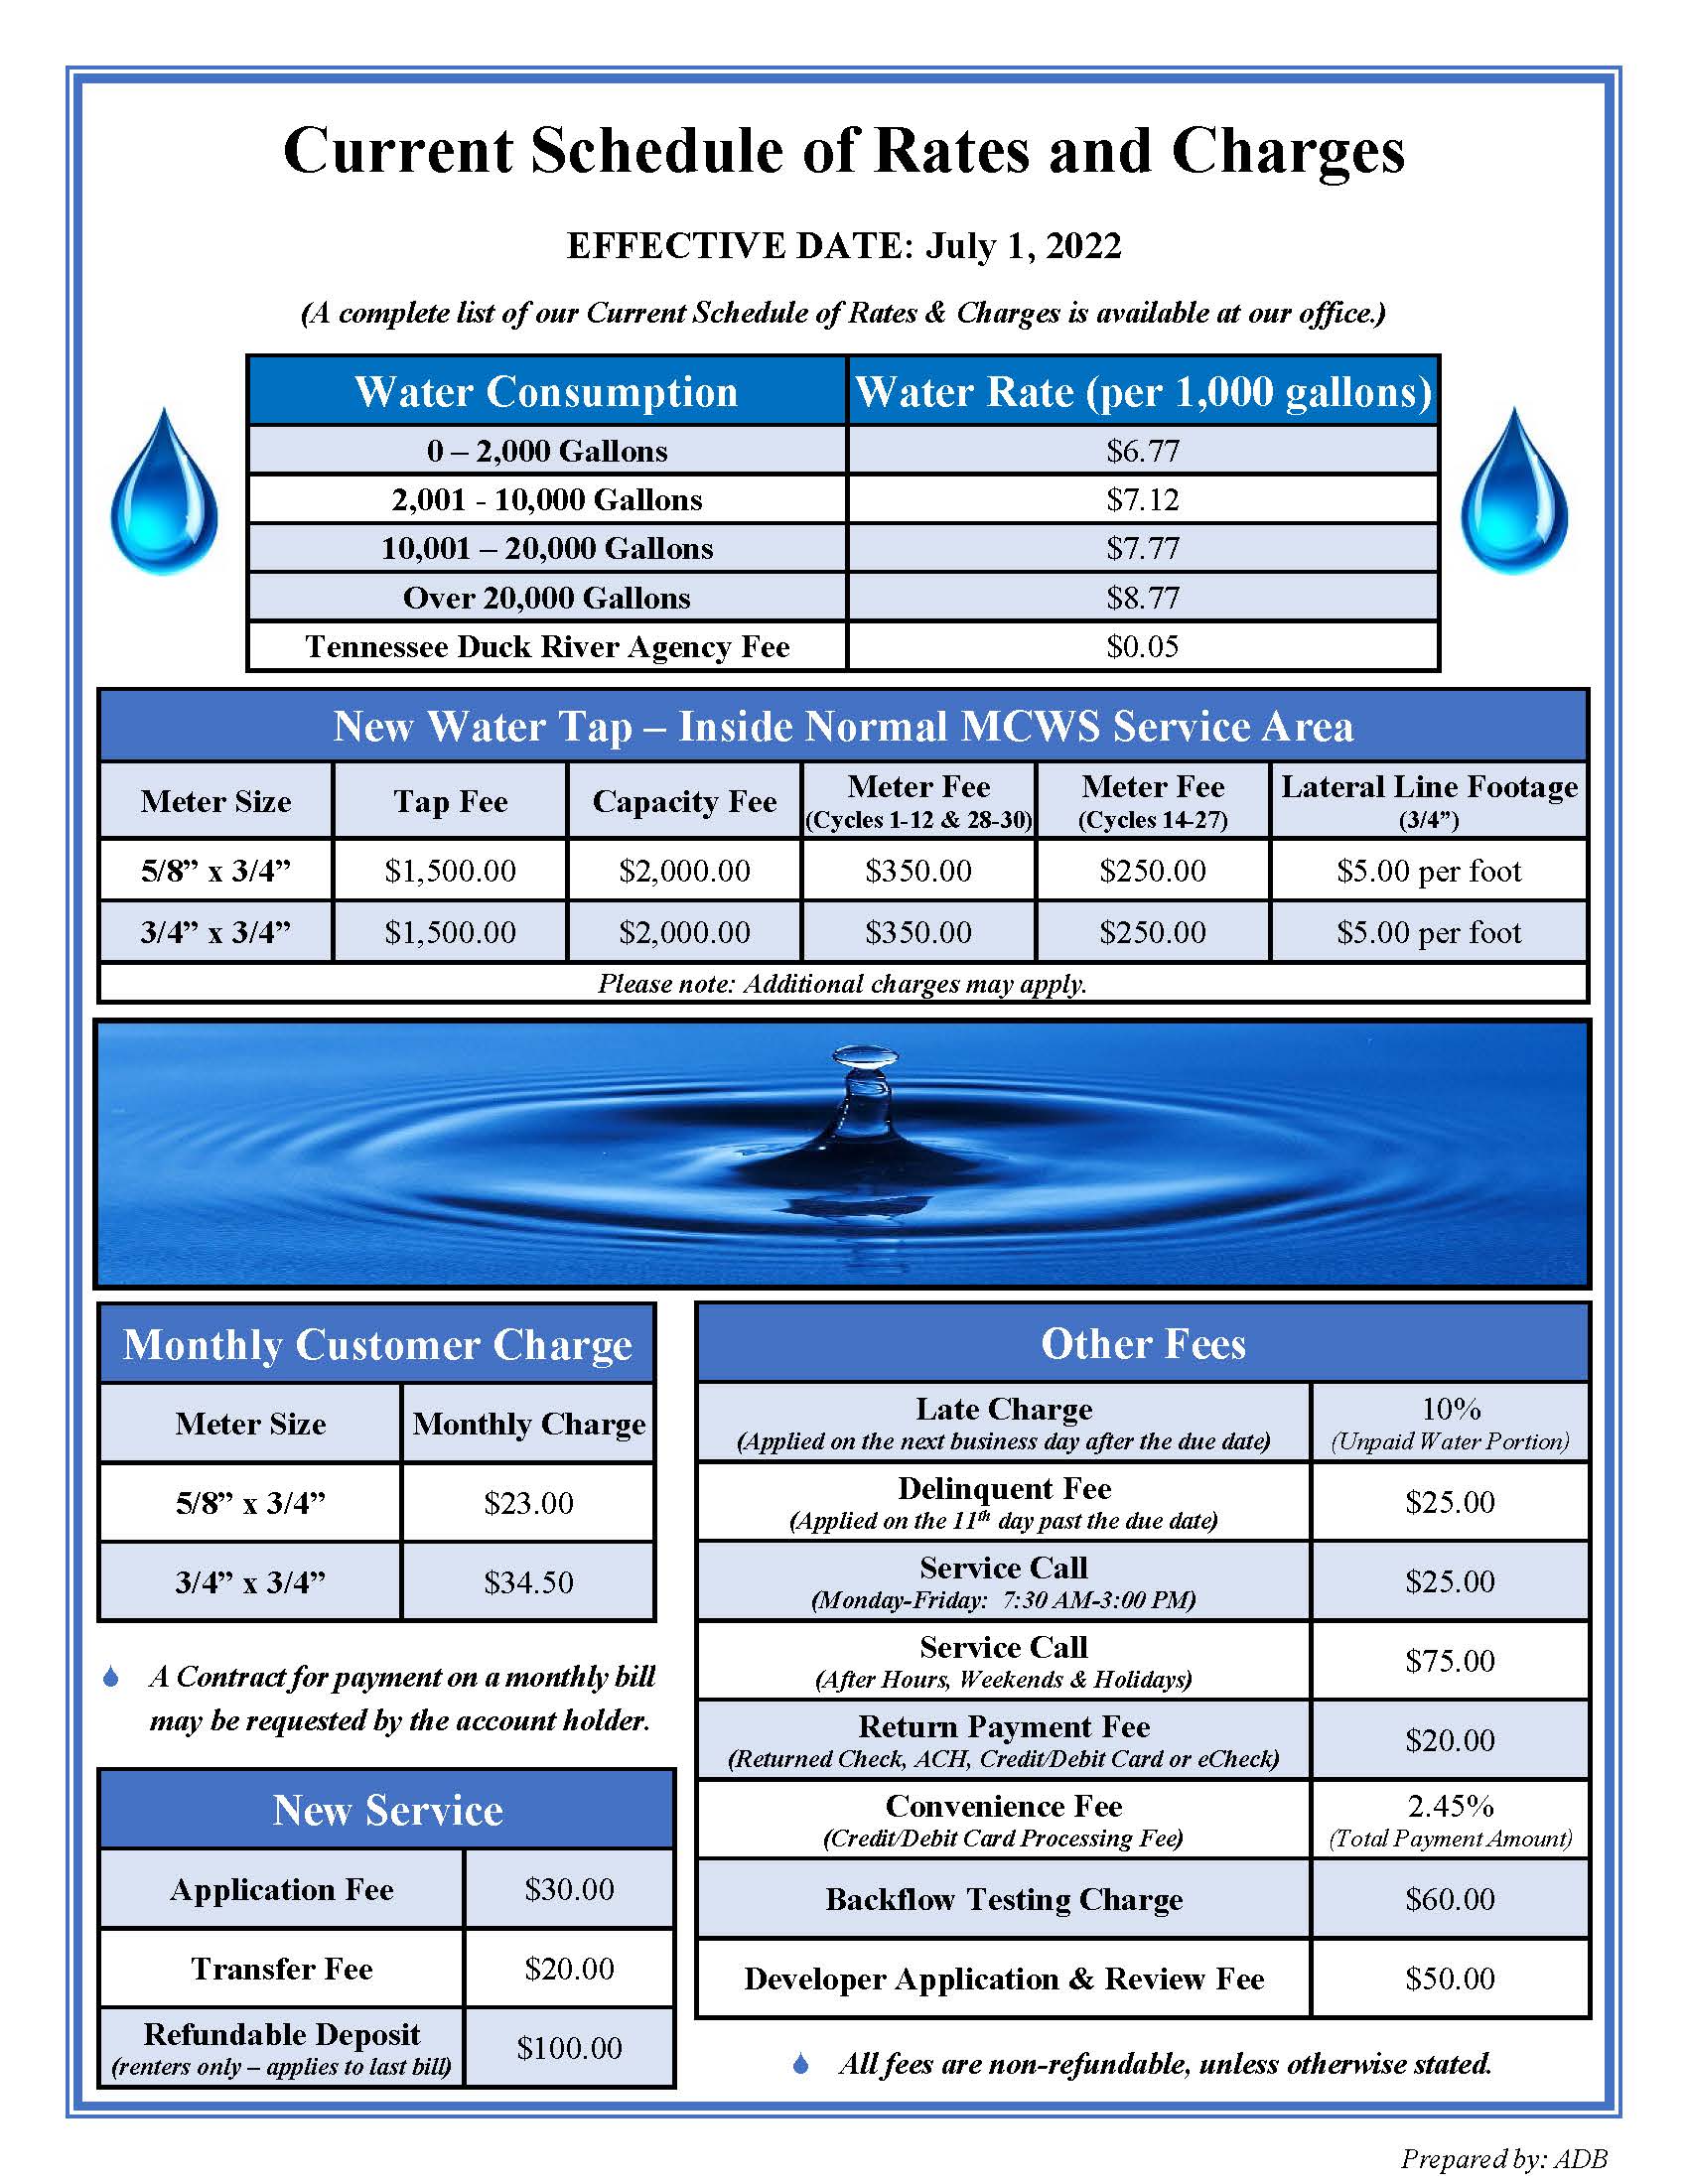 Current Schedule of Rates & Charges Maury County Water System